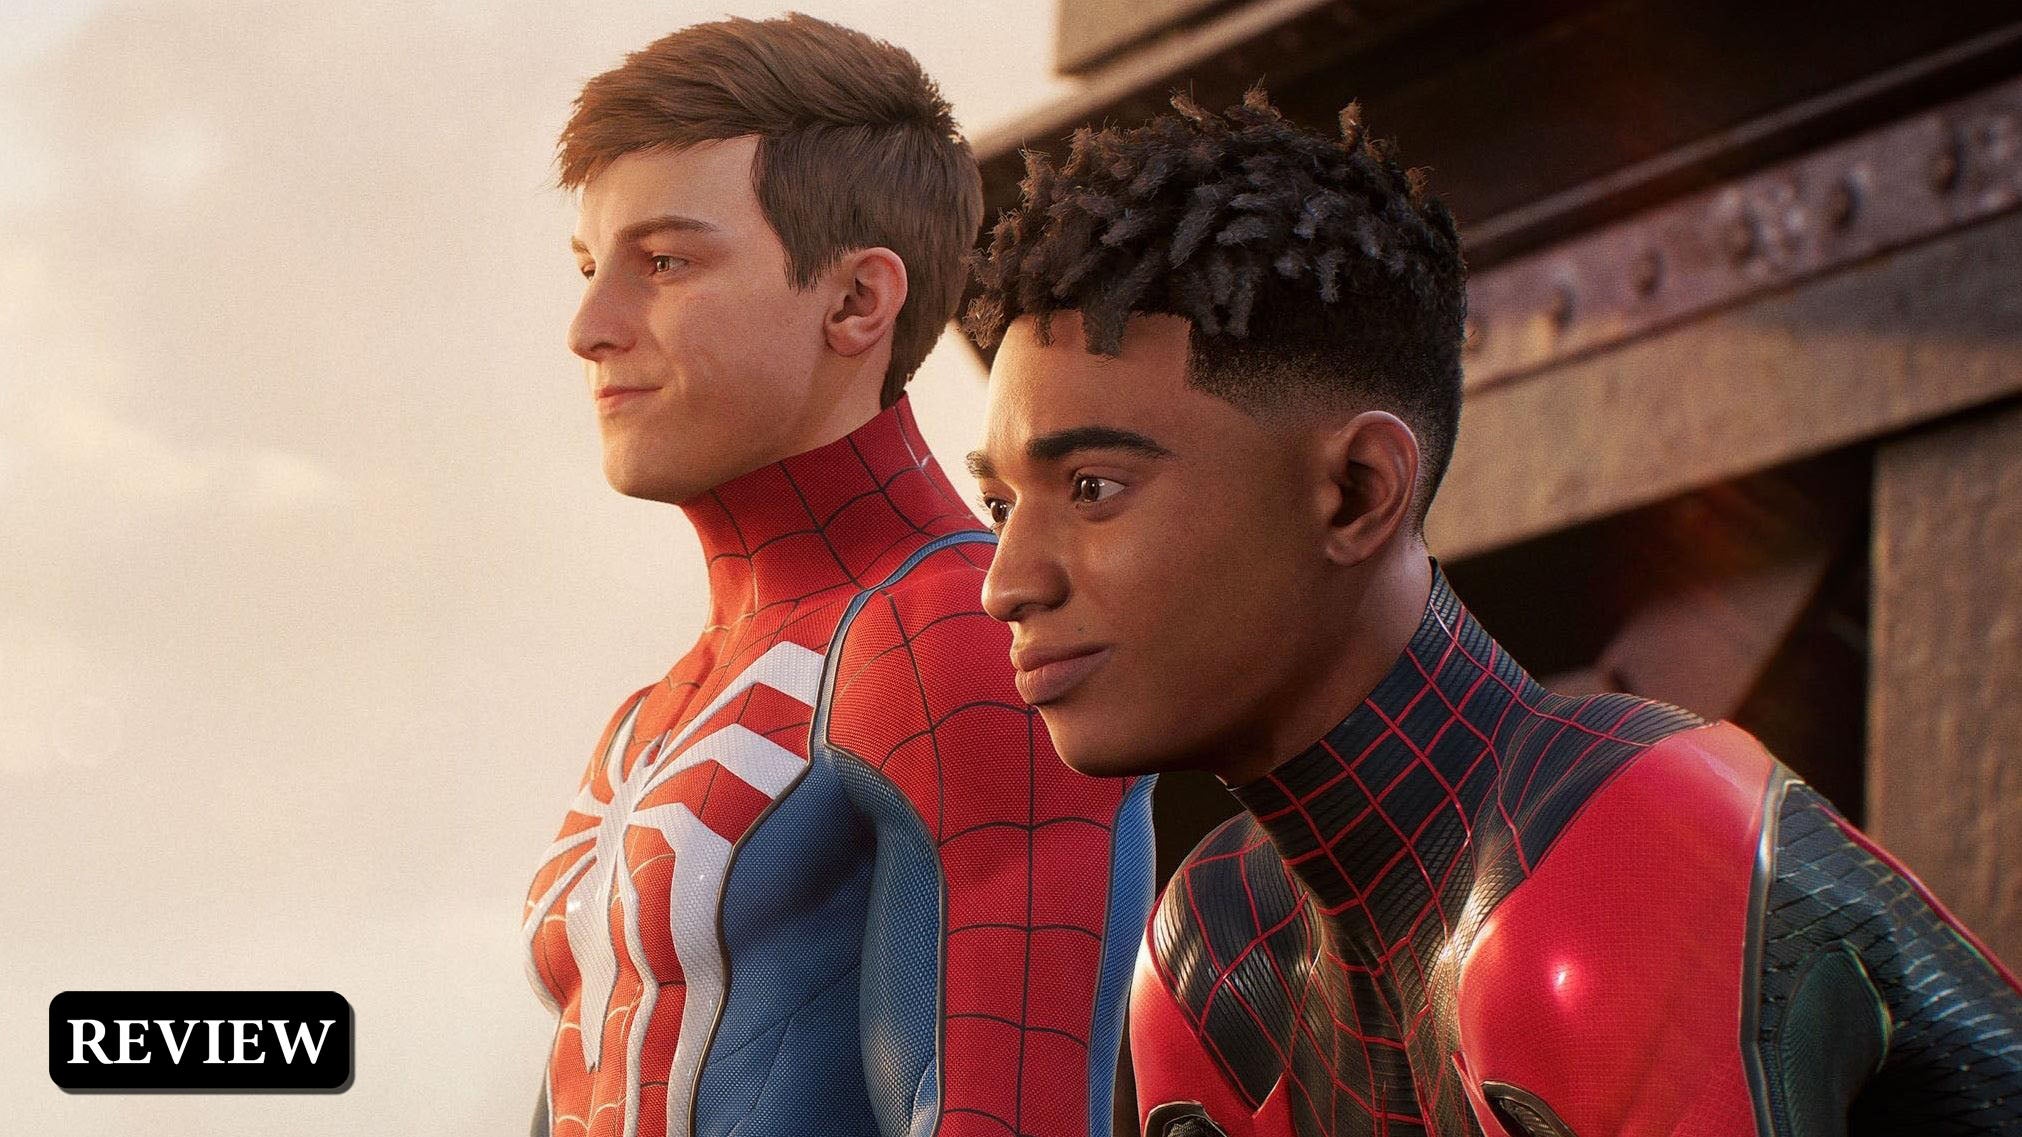 Marvel's Spider-Man 2 - Be Greater. Together. Trailer I PS5 Games on Make a  GIF